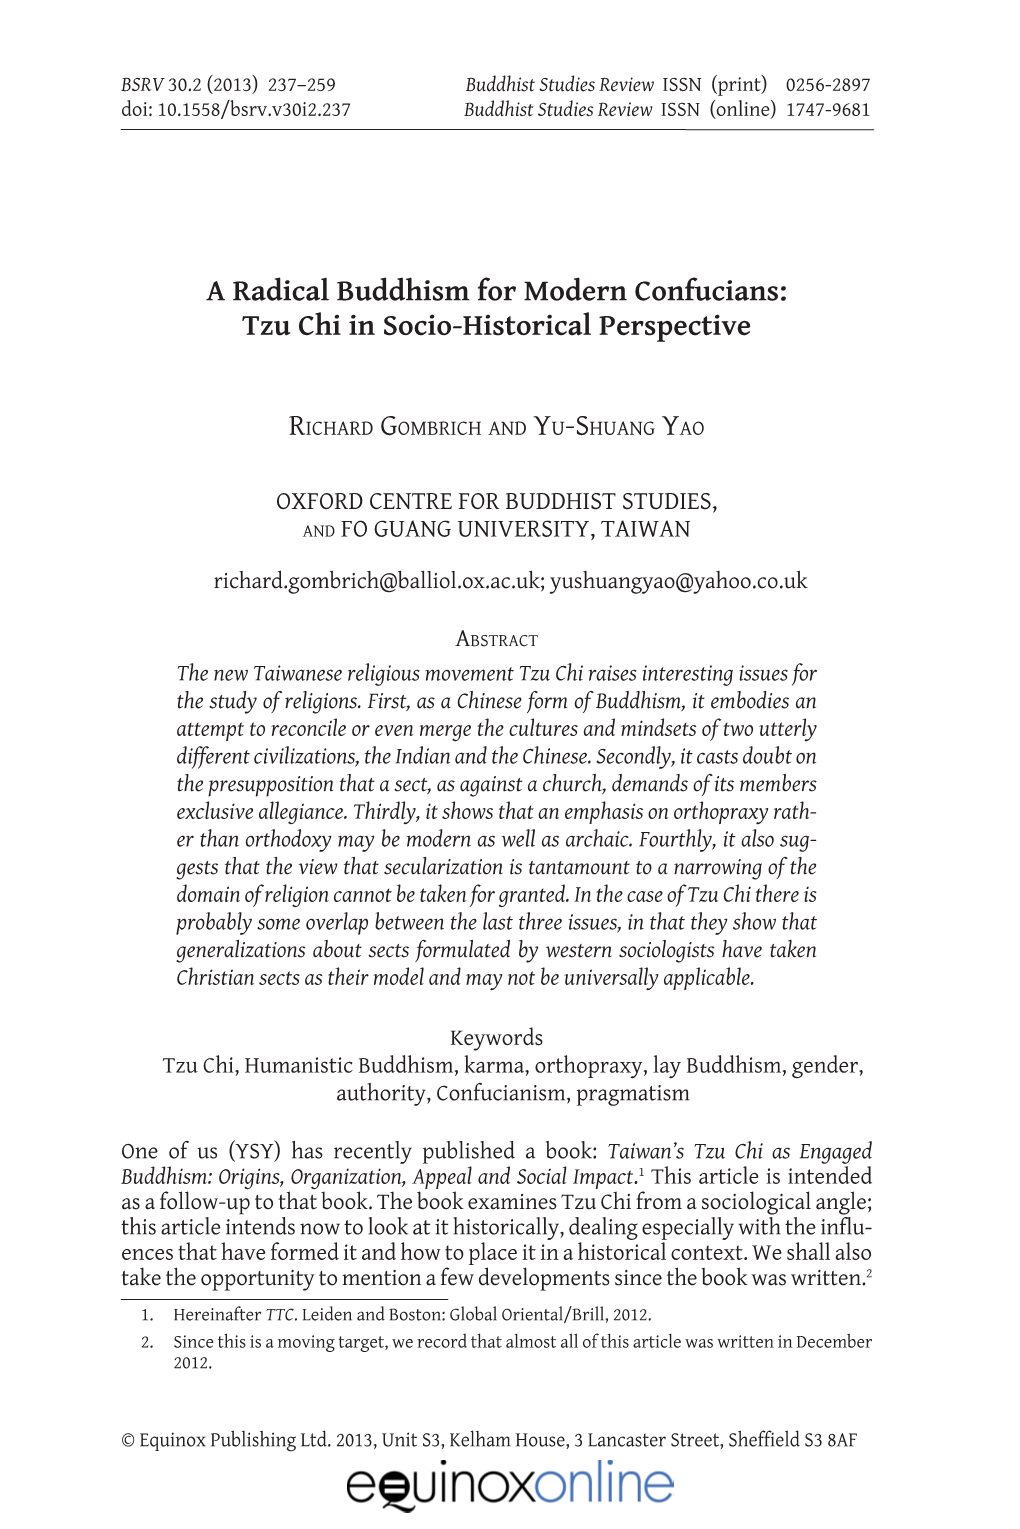 A Radical Buddhism for Modern Confucians: Tzu Chi in Socio-Historical Perspective